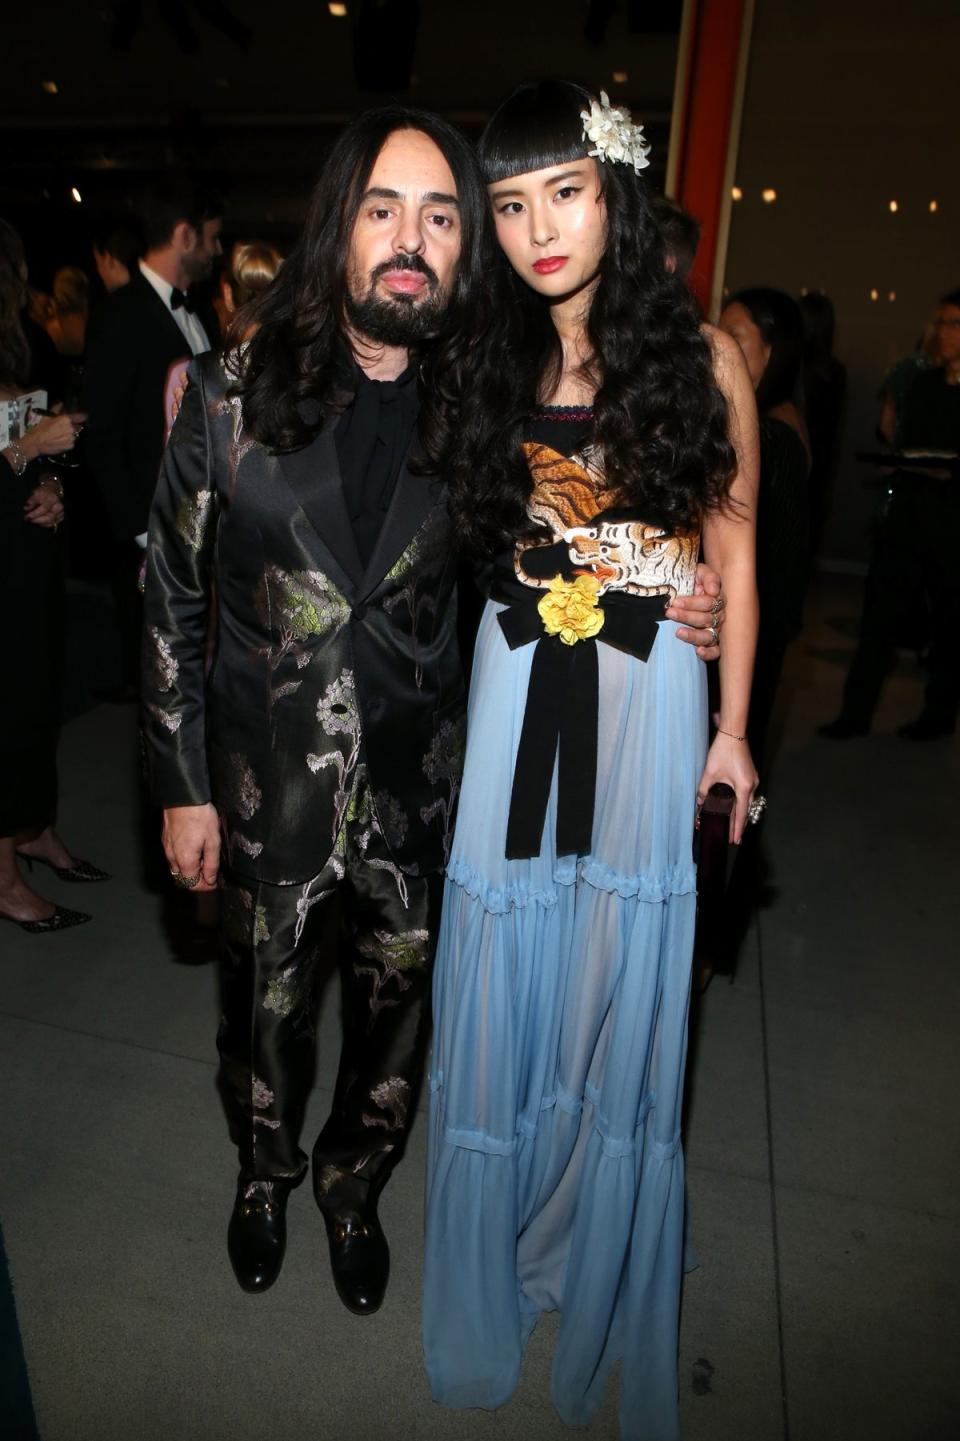 Gucci Creative Director Alessandro Michele (L) and musician Asia Chow, wearing Gucci, attend LACMA's 2015 Art+Film Gala Honoring James Turrell and Alejandro G IÃ±Ã¡rritu, presented by Gucci at LACMA on 7 November 2015 in Los Angeles.  California (fake images)